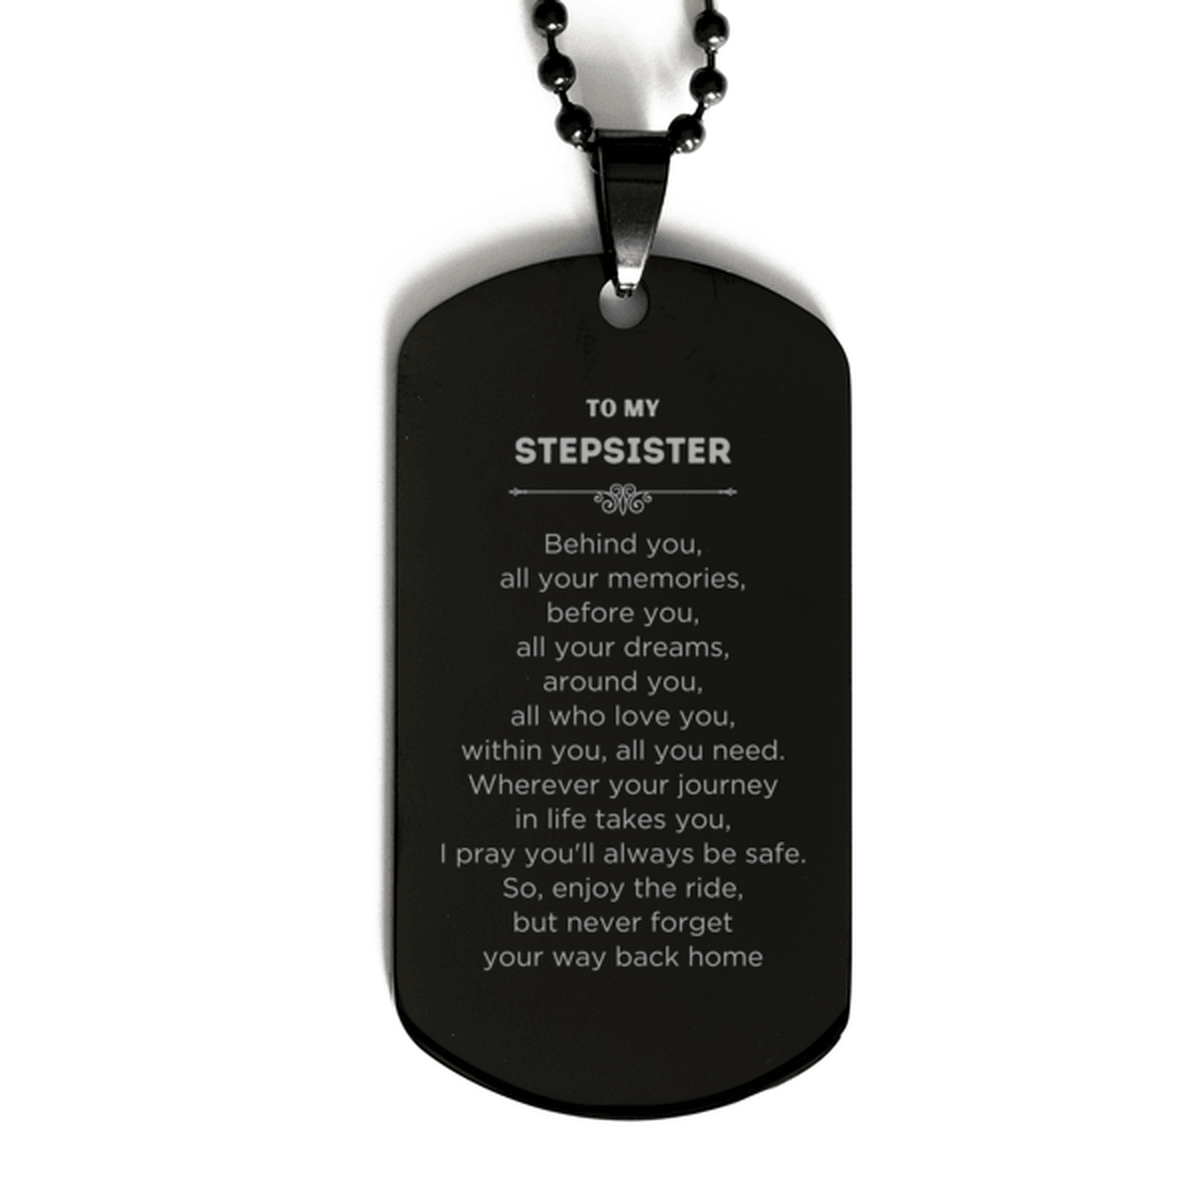 Stepsister Black Dog Tag Necklace Birthday Christmas Unique Gifts Behind you, all your memories, before you, all your dreams - Mallard Moon Gift Shop